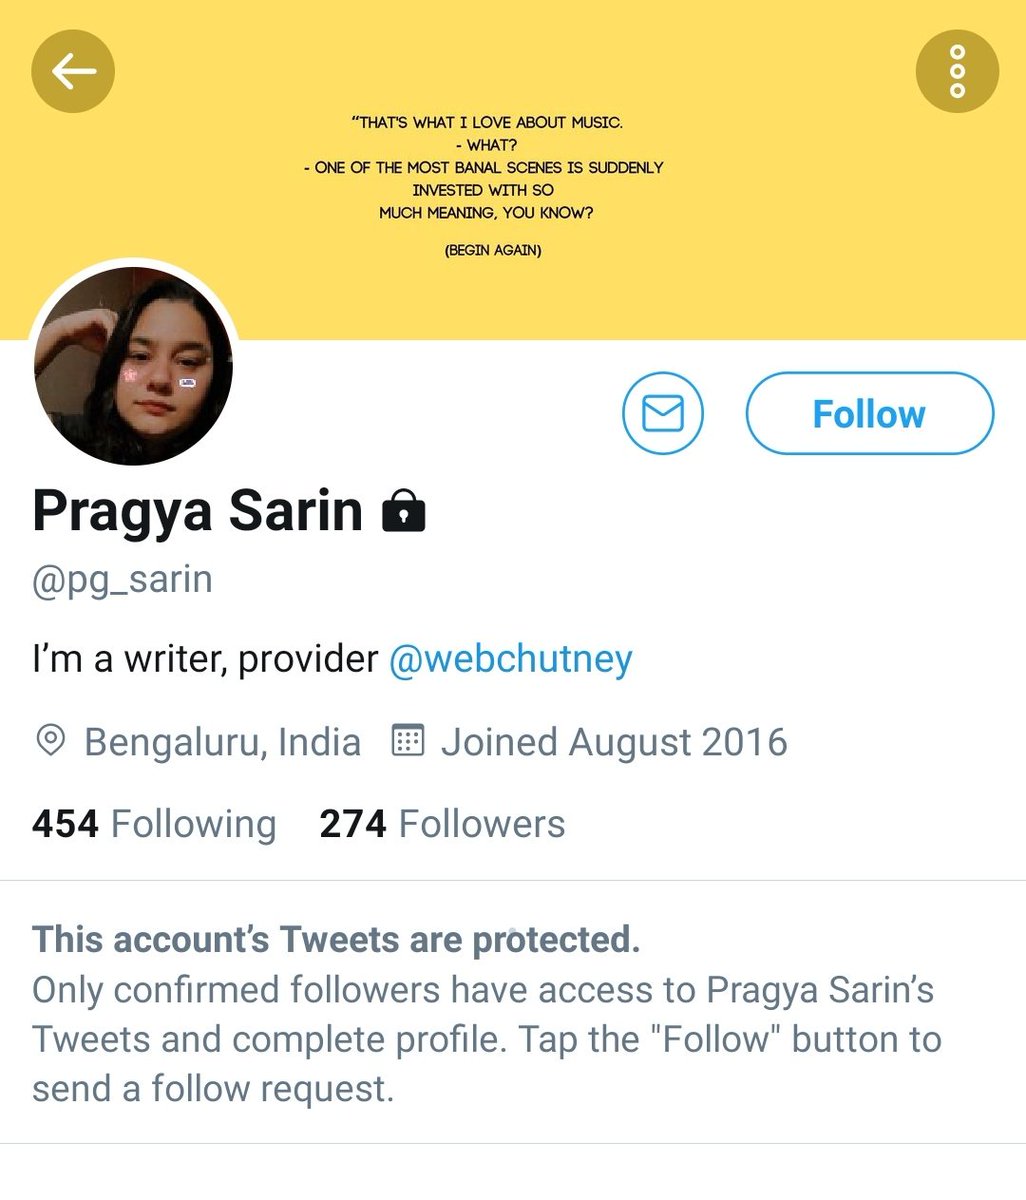 After exposed. They have protected their account now